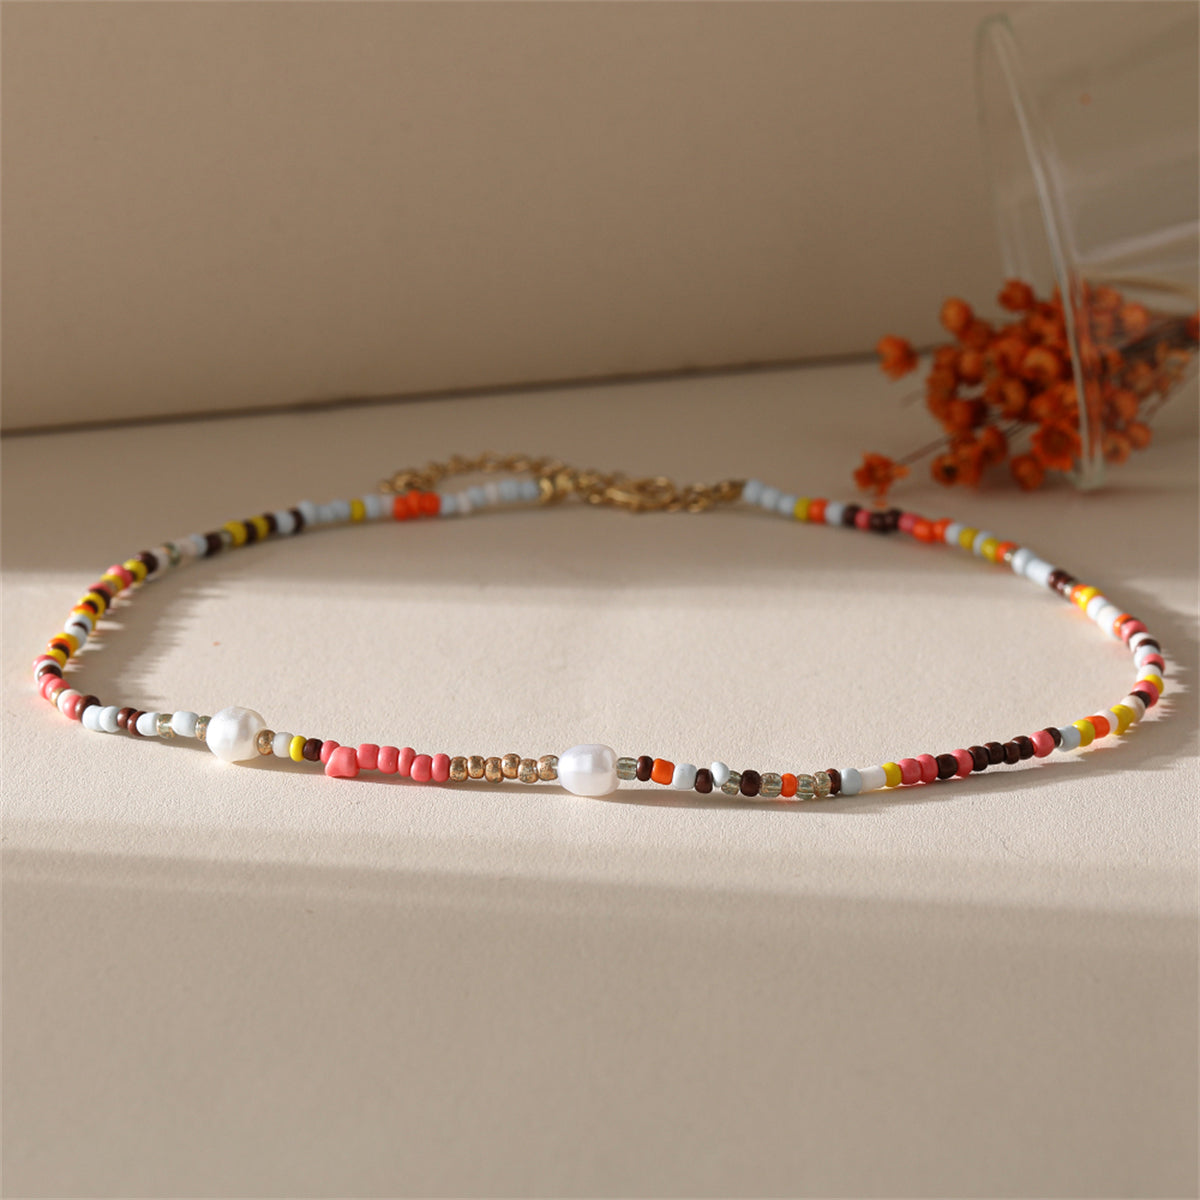 Multicolor Howlite & Pearl Beaded Necklace